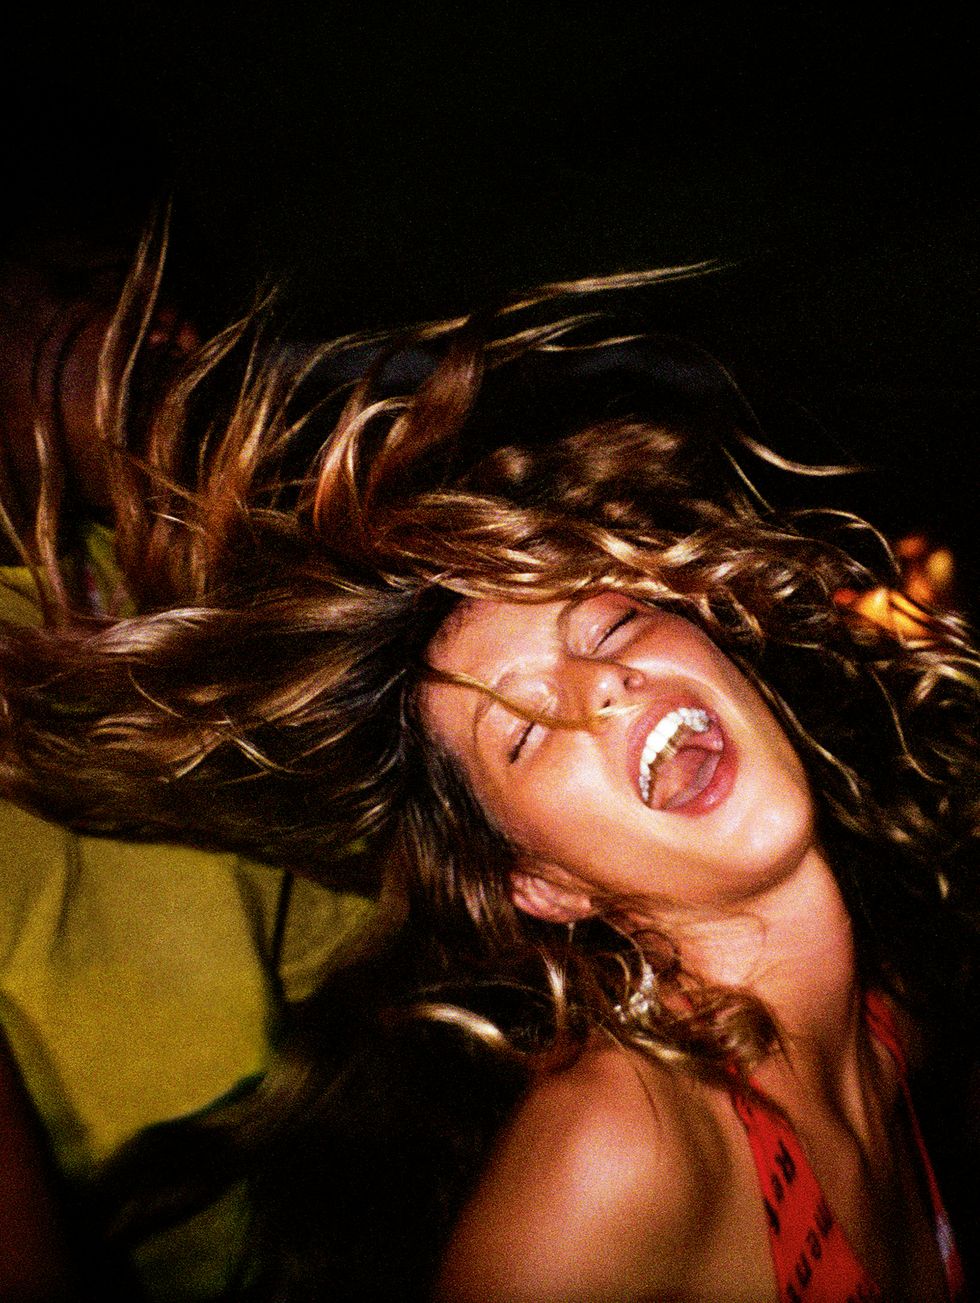 Taschen to re-release Gisele book